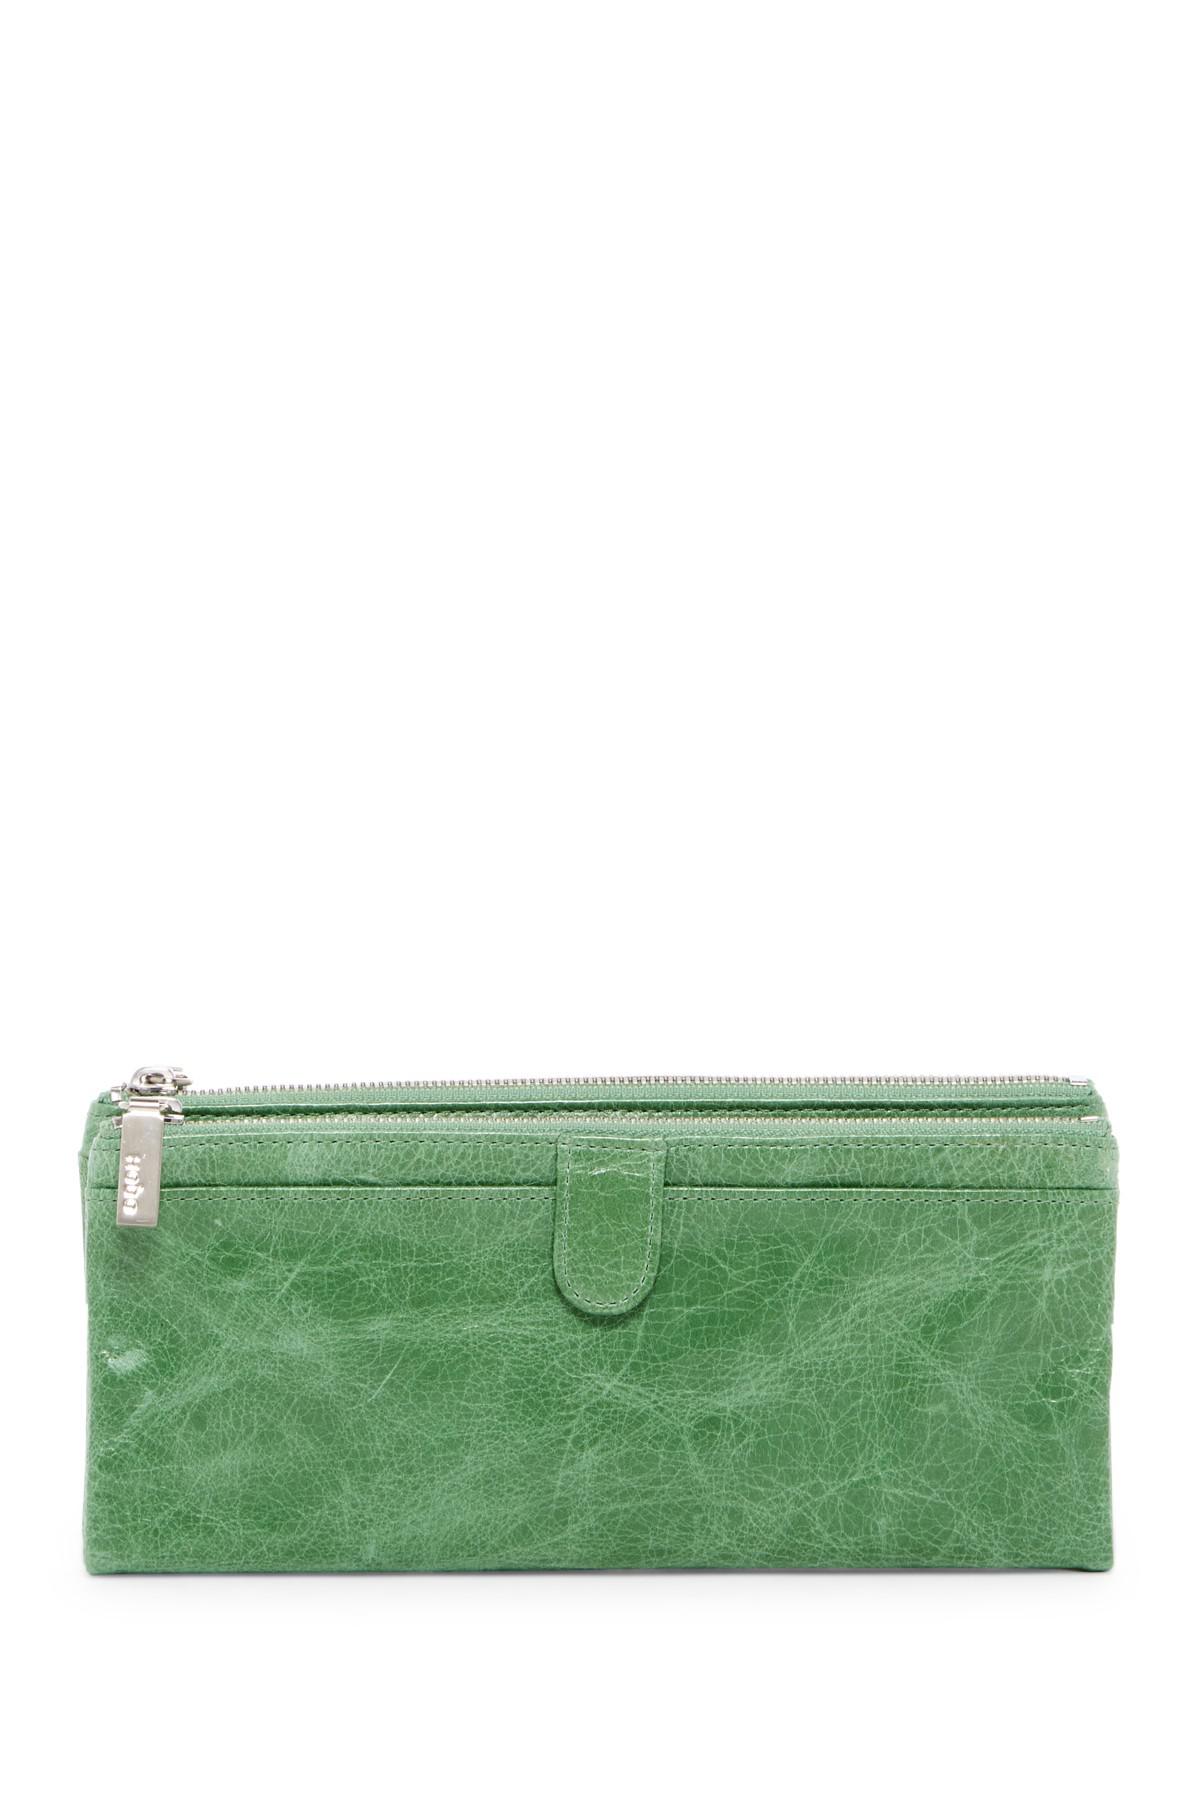 Hobo Taylor Leather Wallet in Green - Lyst